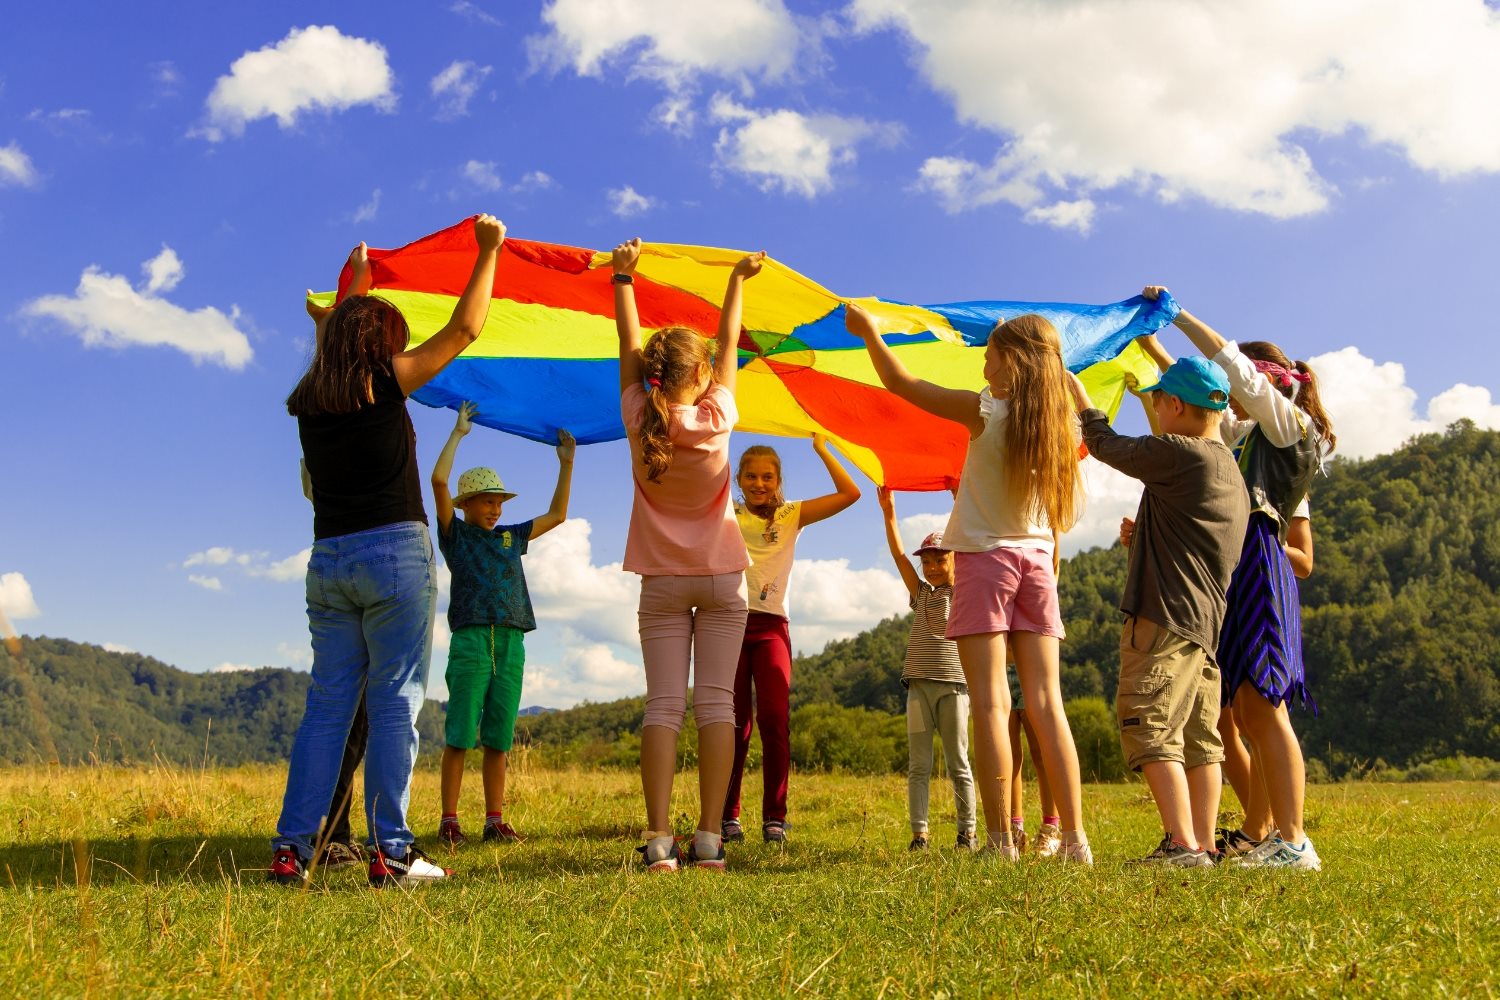 10 Fun And Affordable Activities For Kids In Your Area